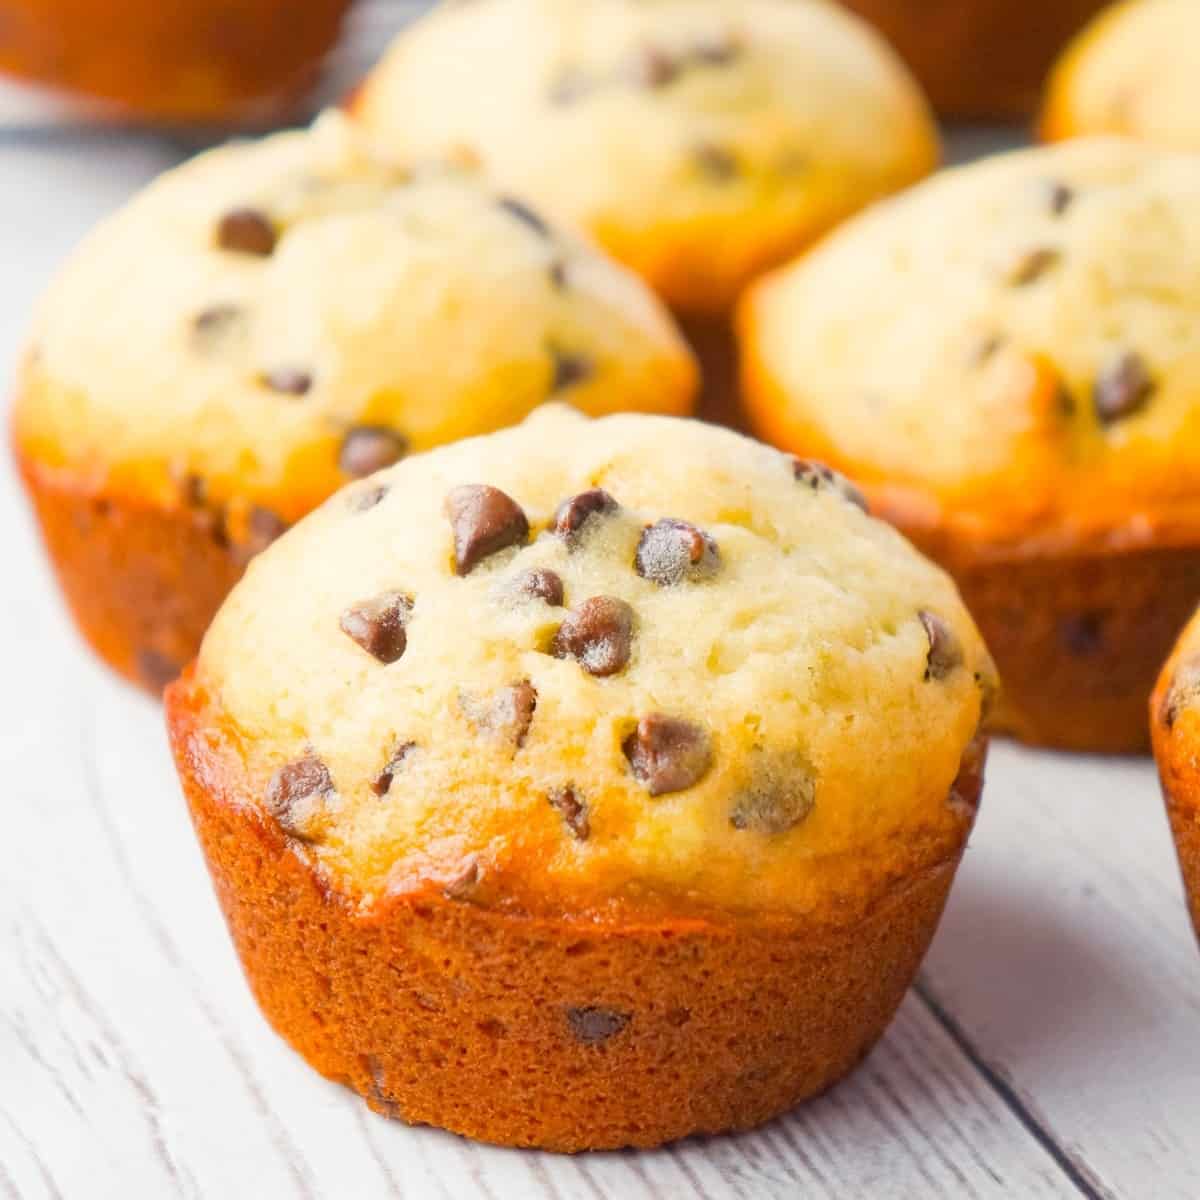 Chocolate Chip Banana Muffins are an easy breakfast or snack recipe made from ripe bananas and loaded with mini semi sweet chocolate chips.